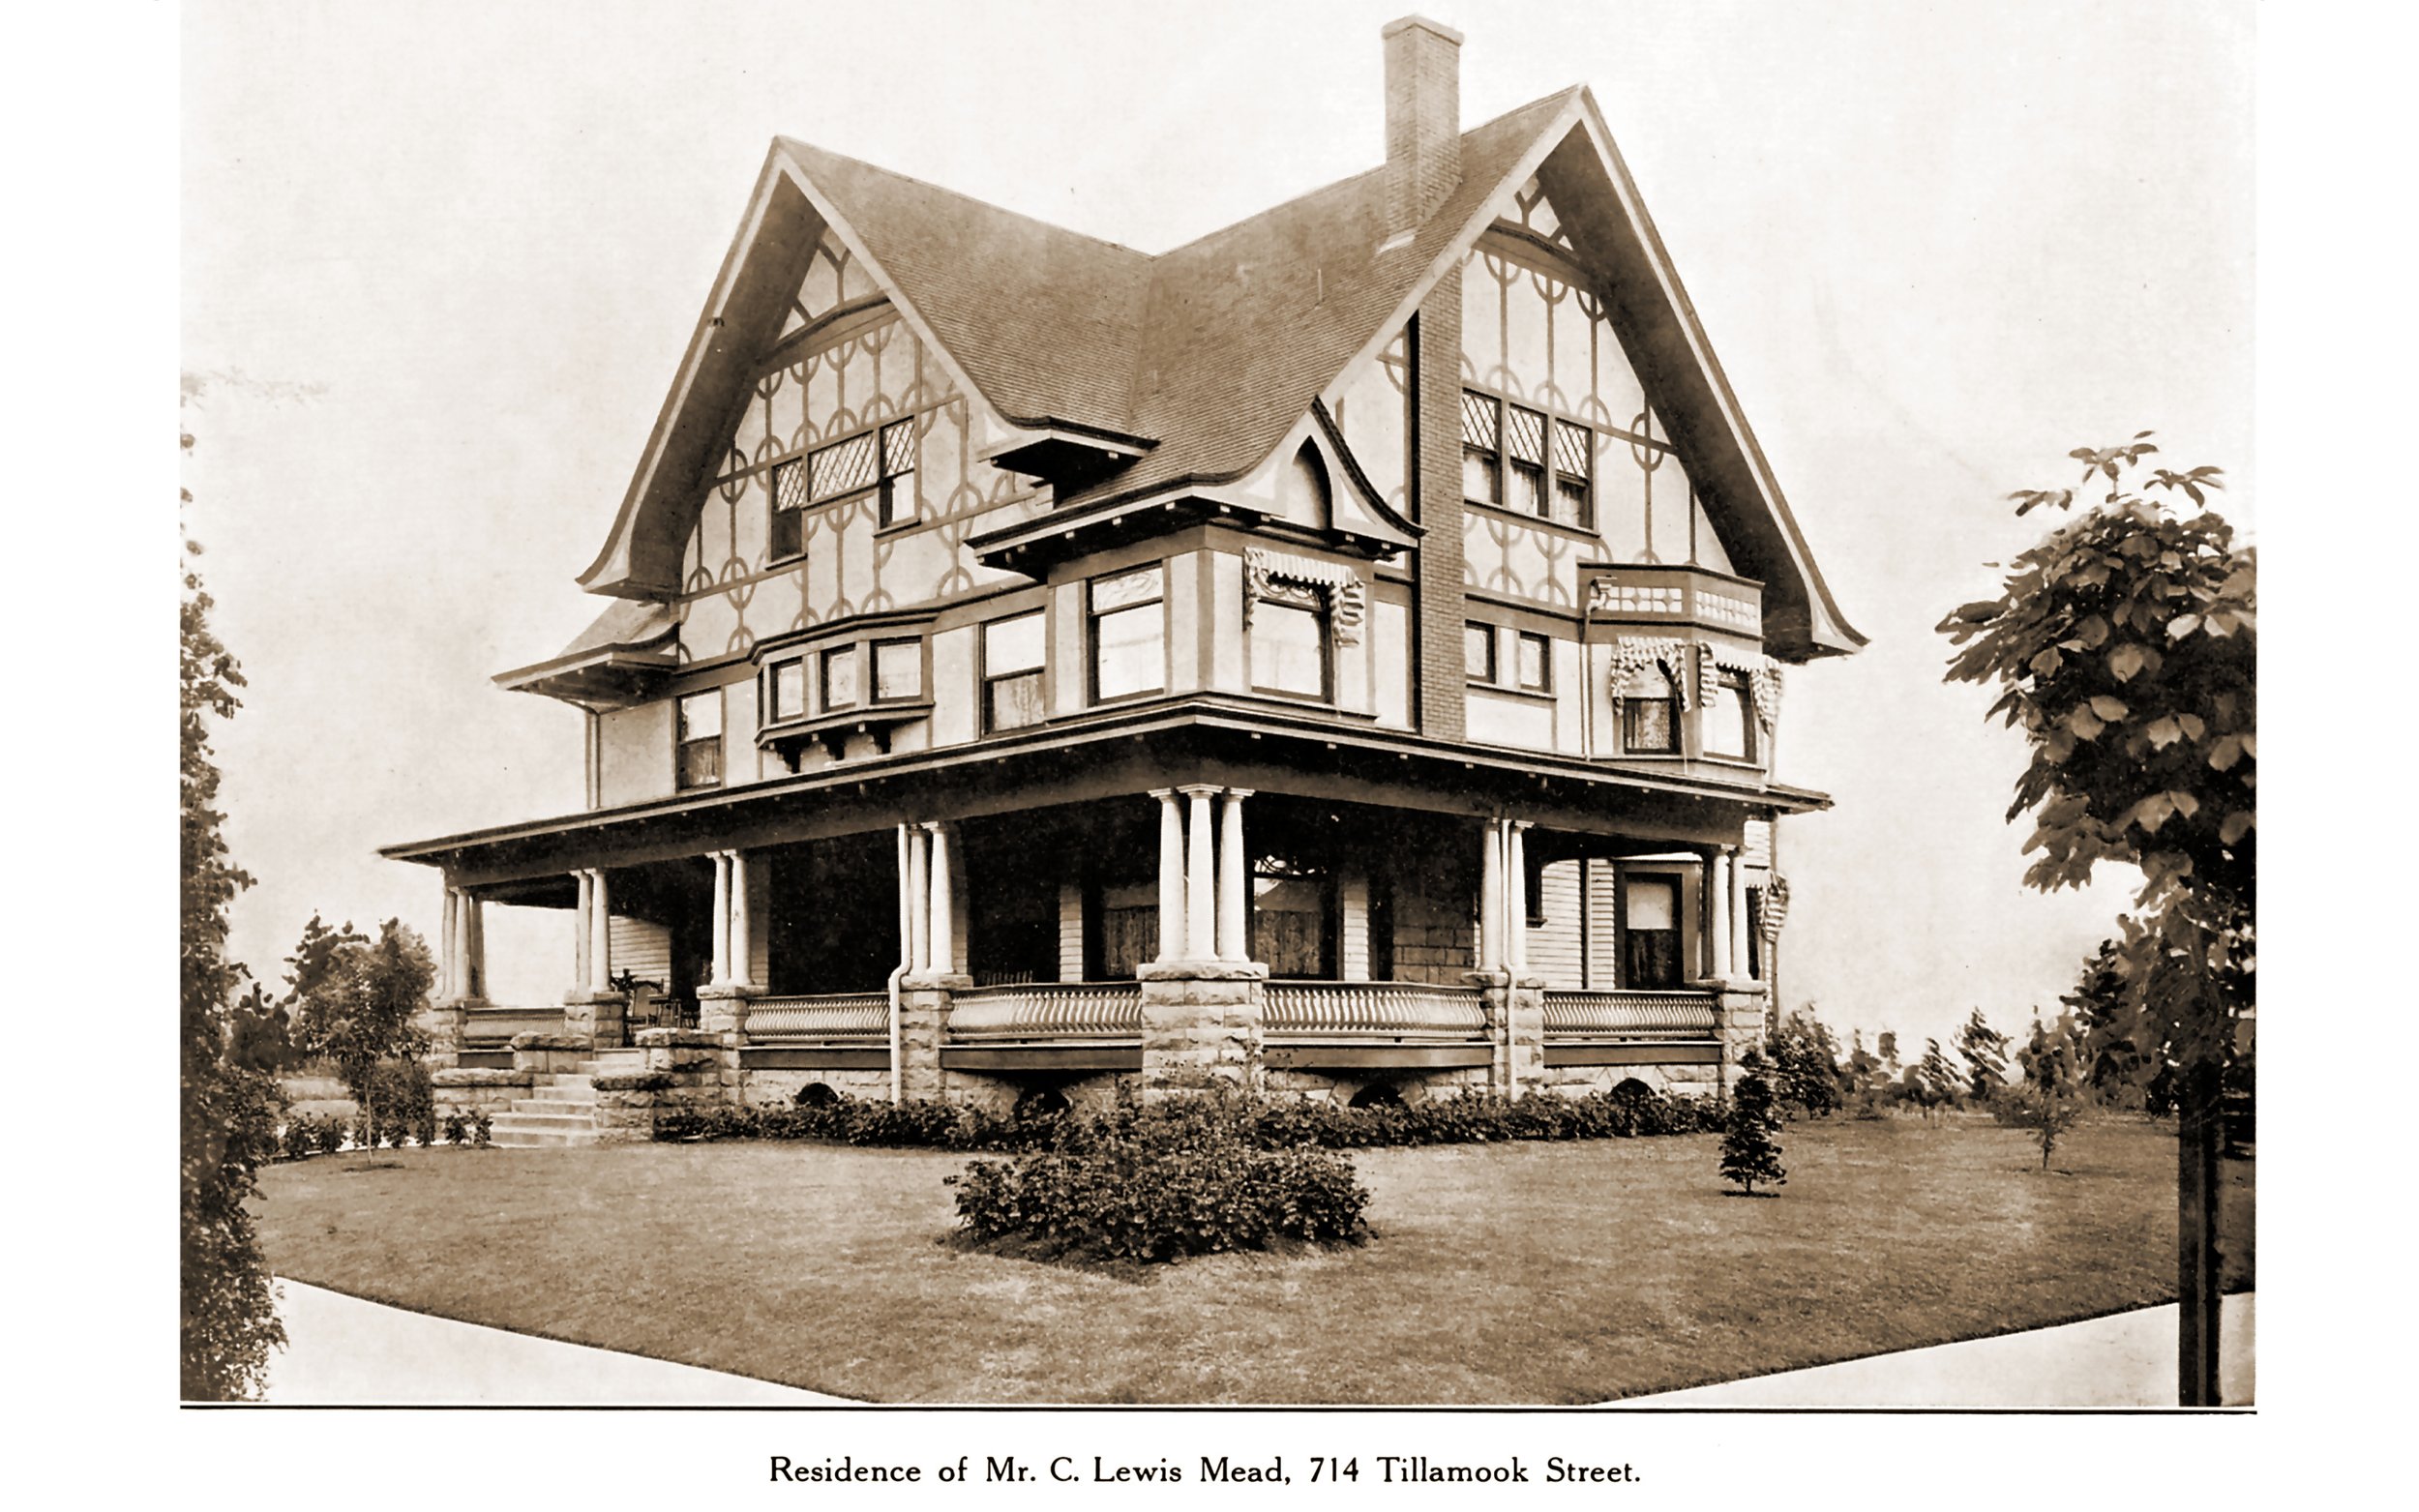  This large Arts &amp; Crafts residence is sadly no longer standing. Photo ca. 1911. 